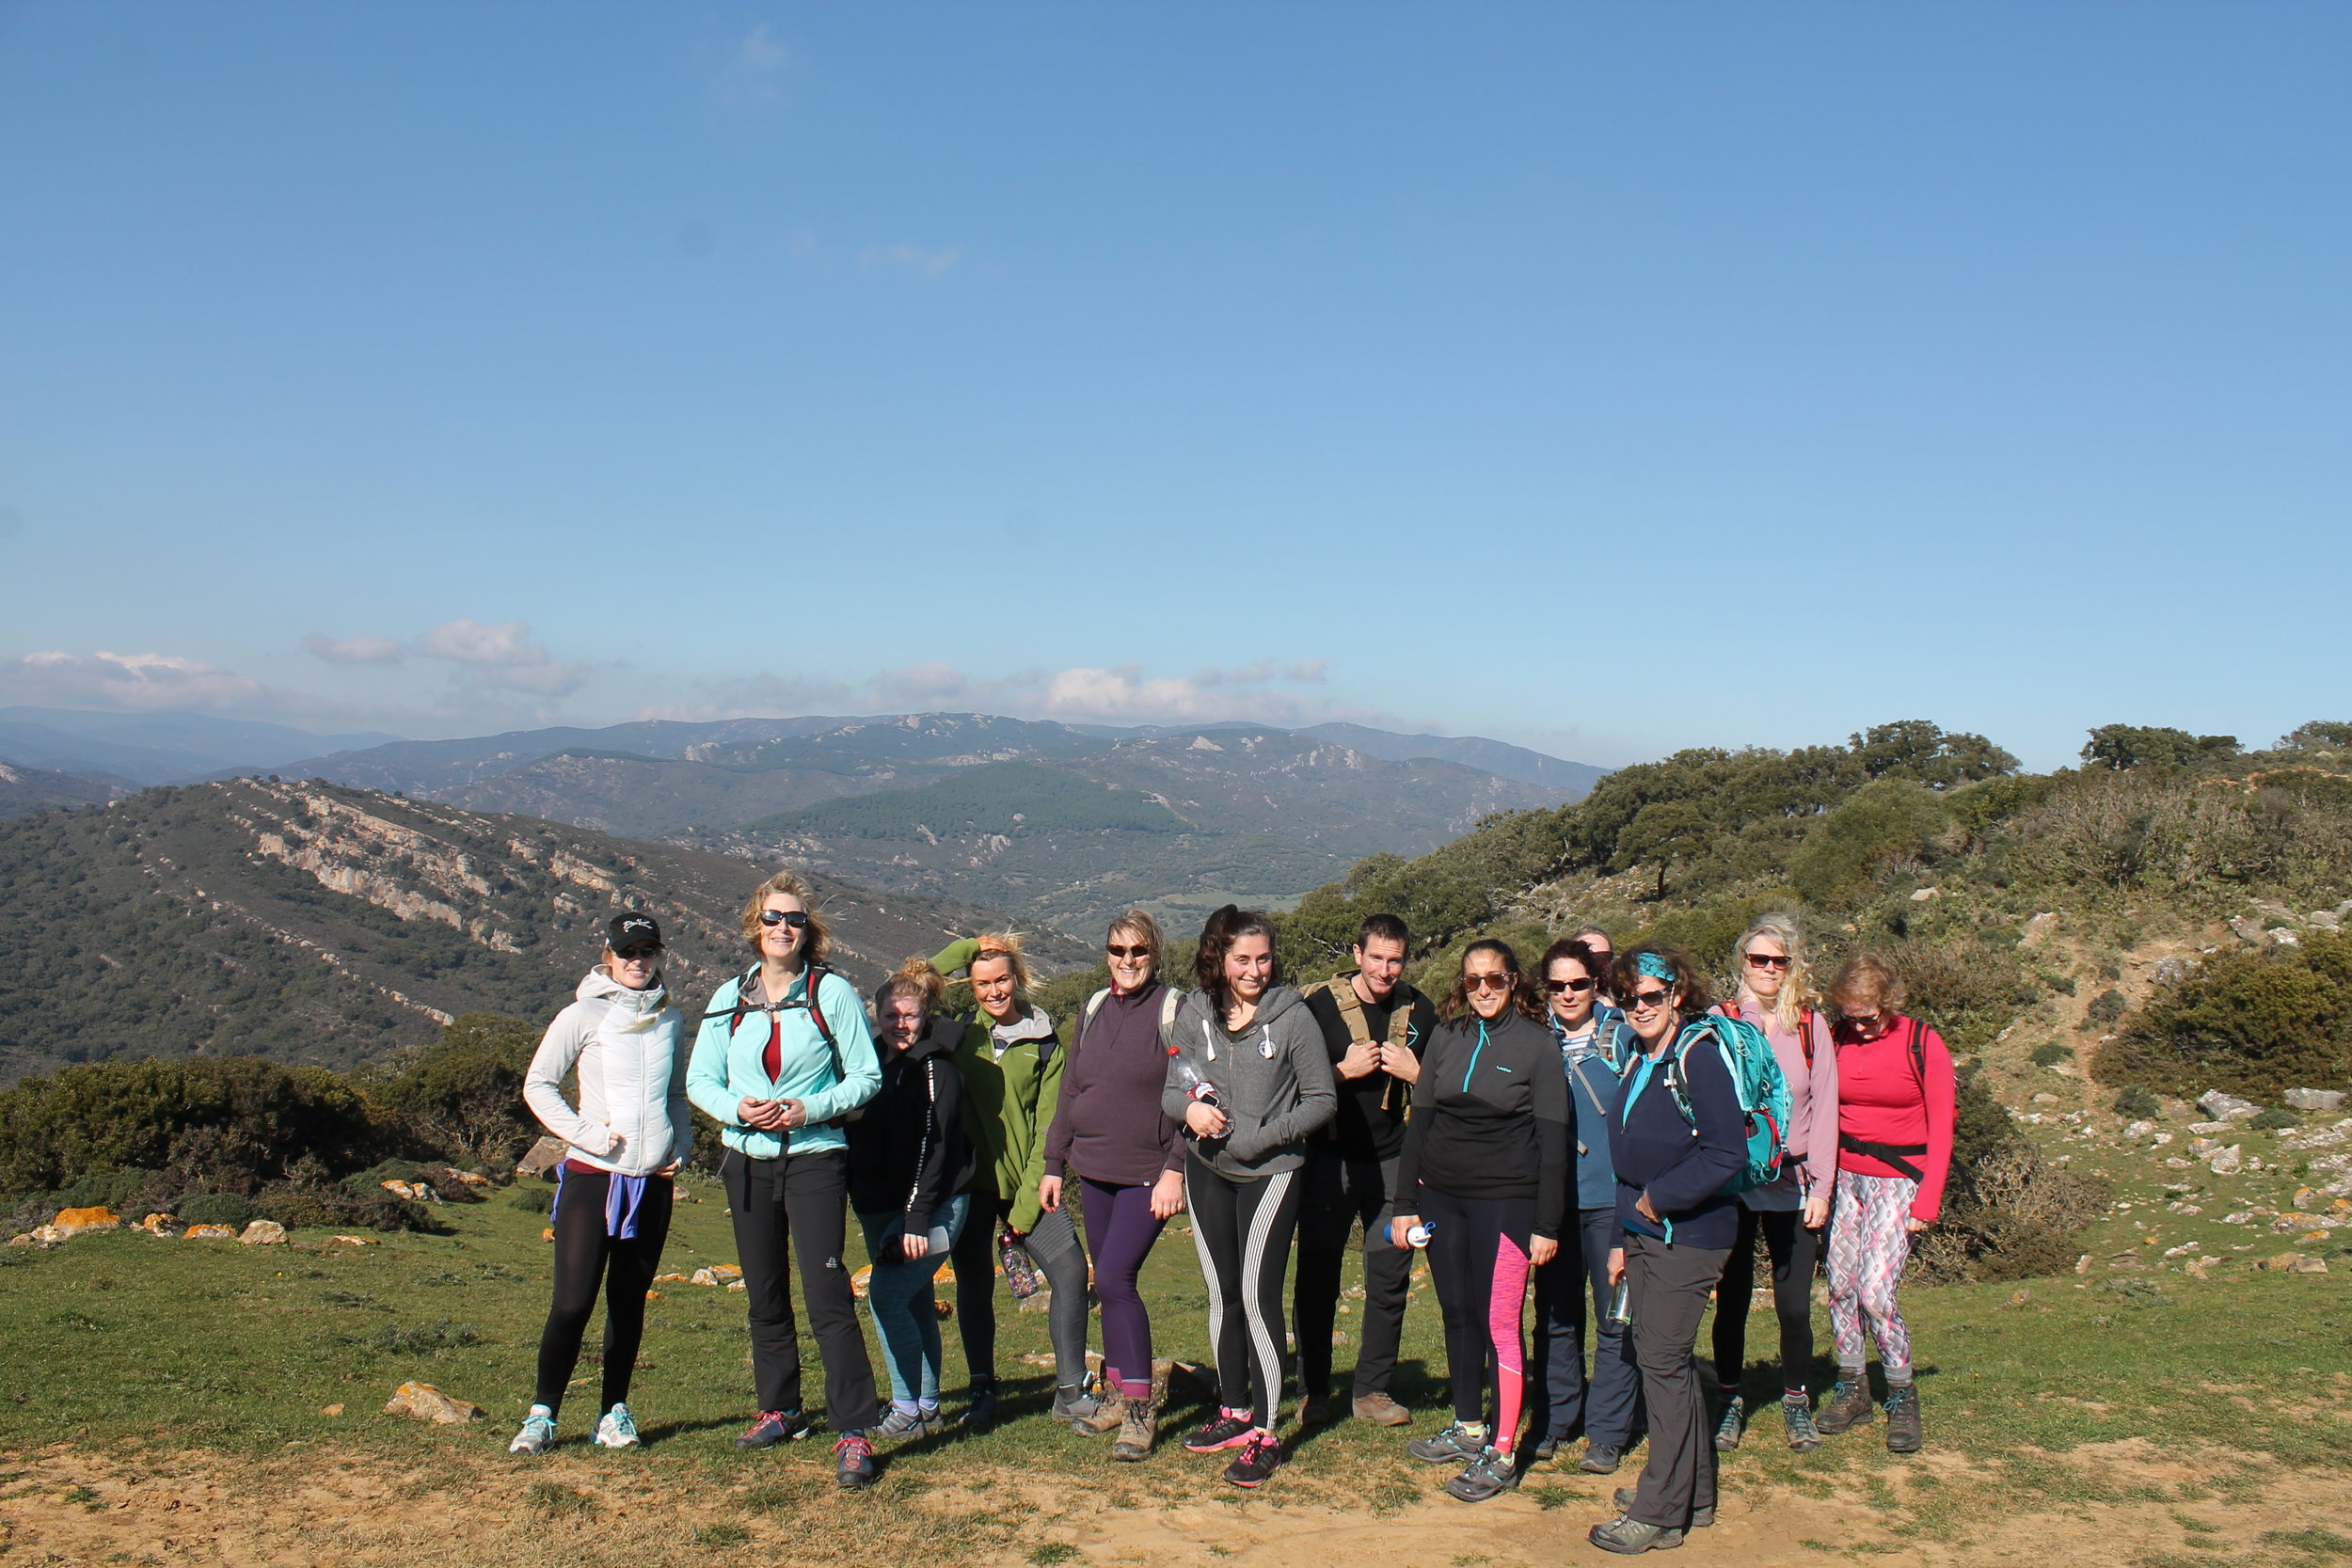 Hiking in the national park - a great fat burning activity on the Who Dares Slims Boot Camp